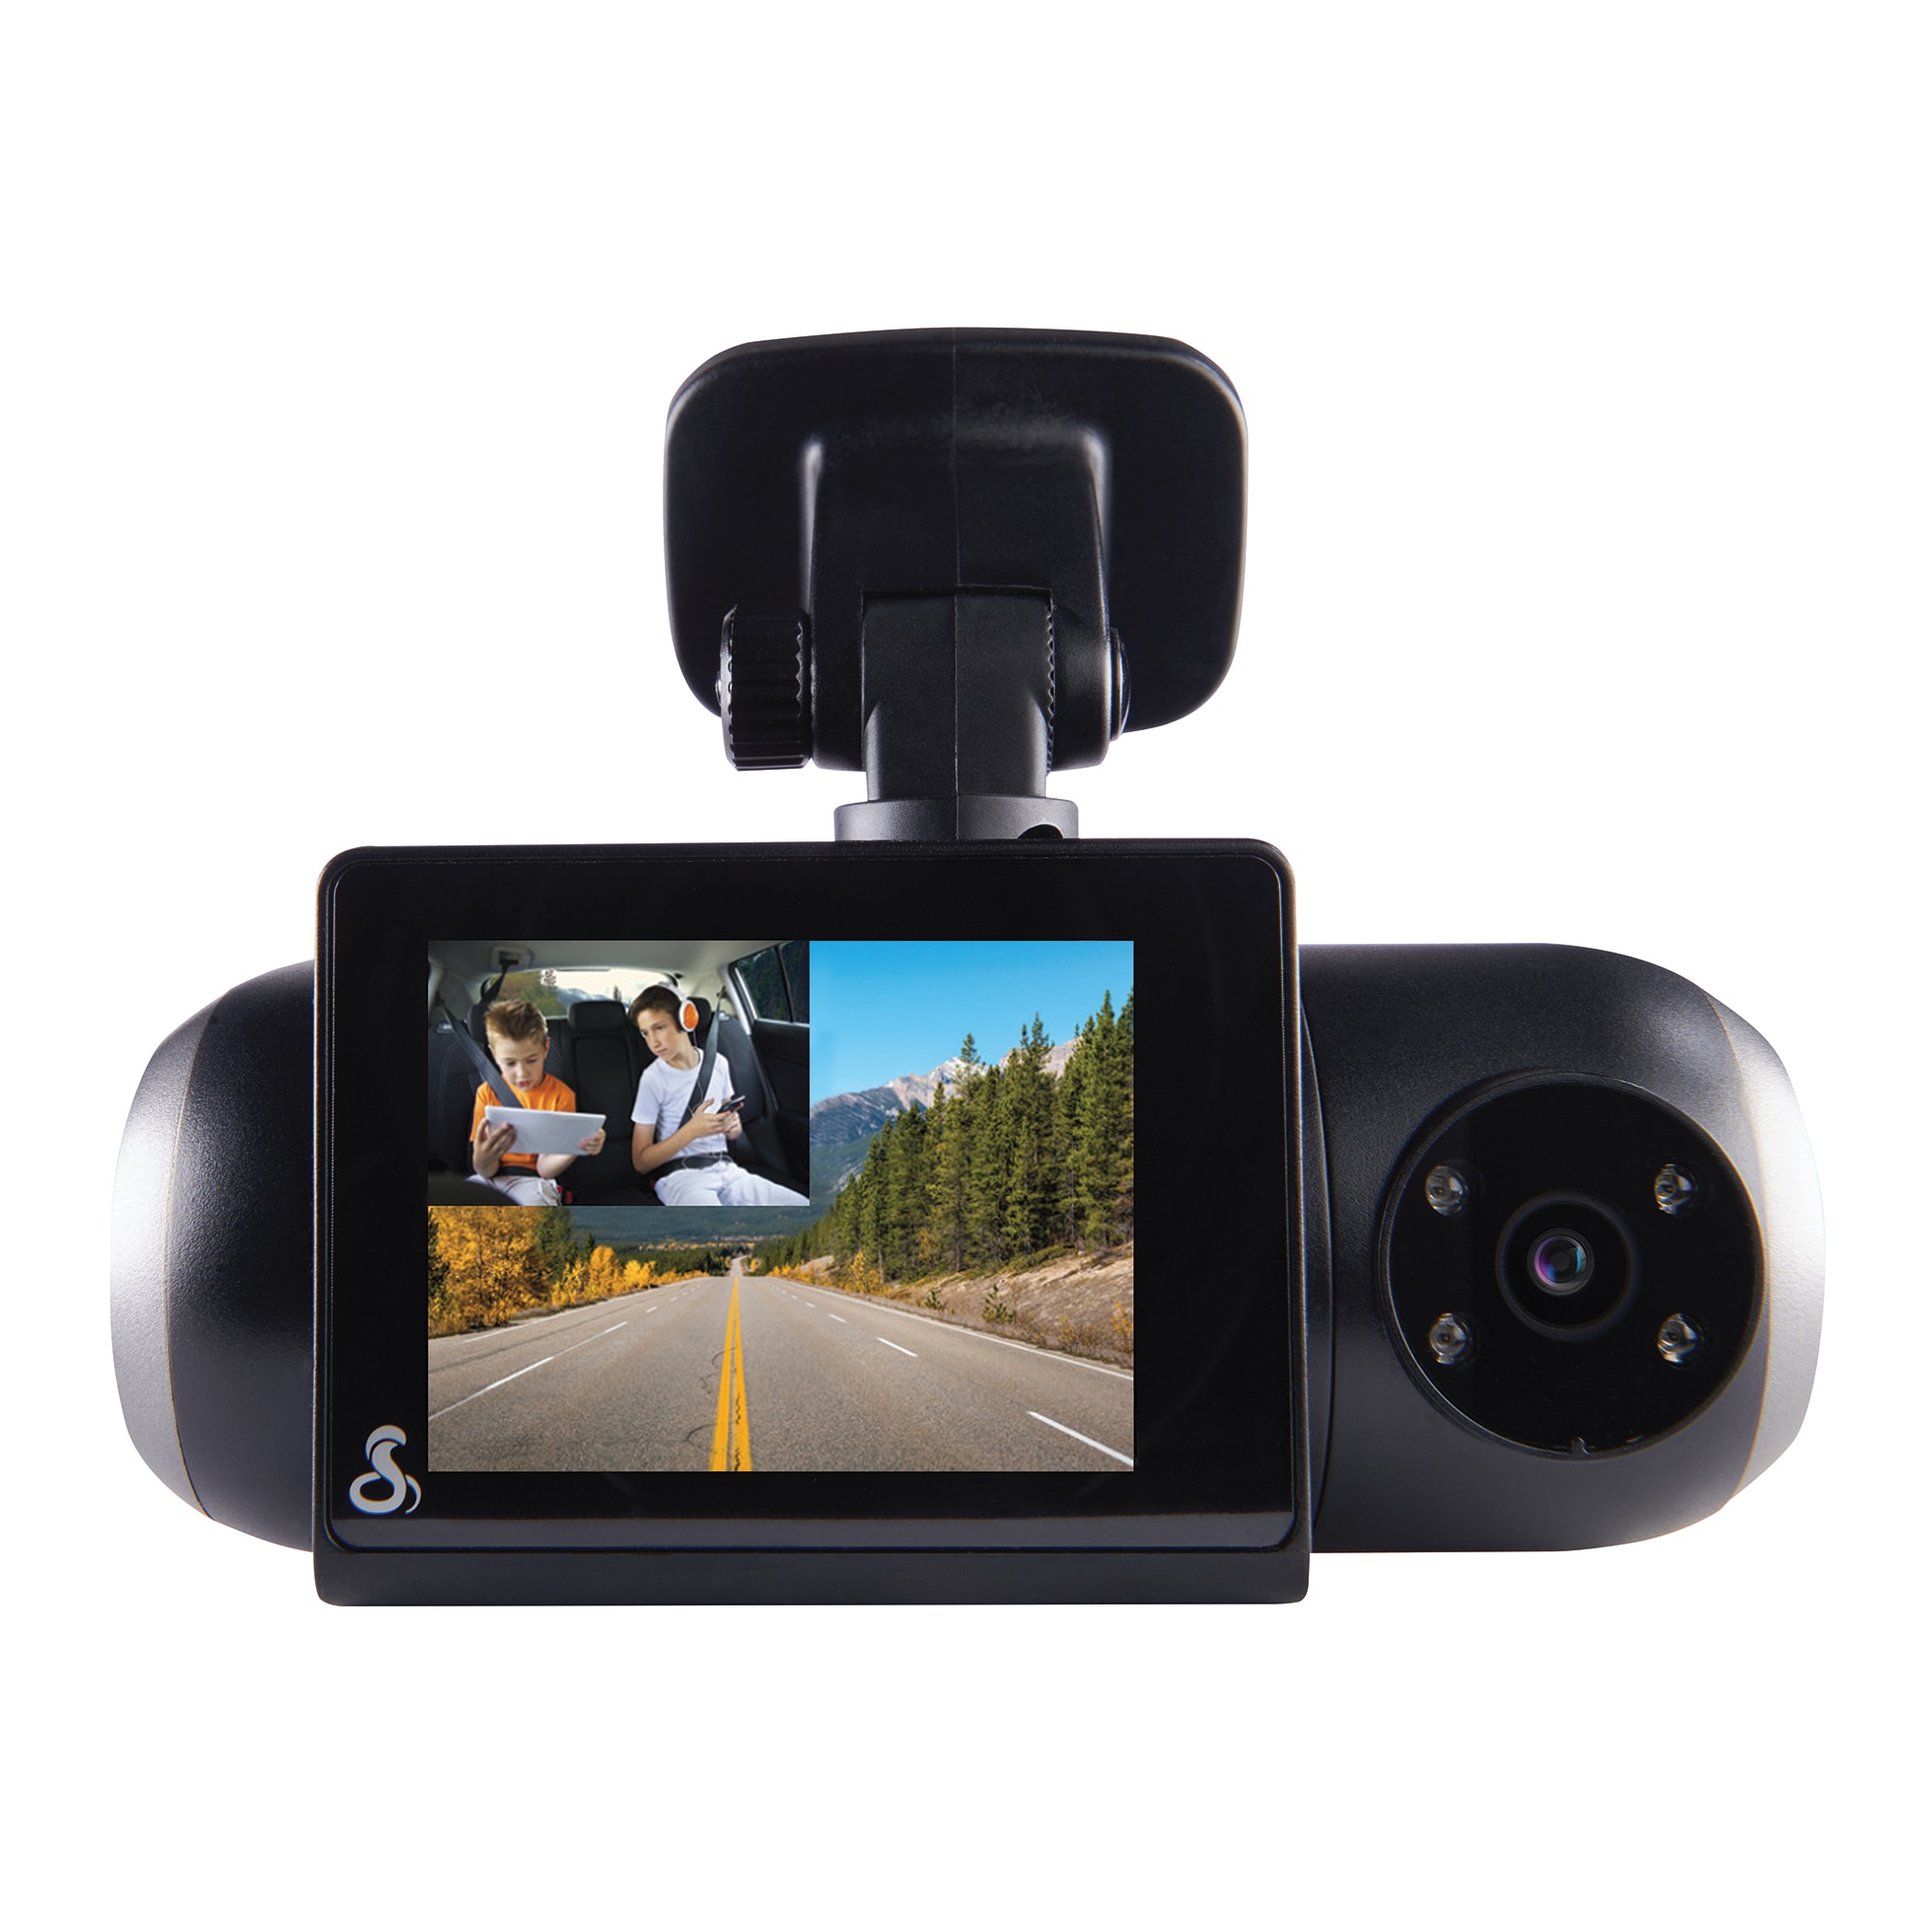 Dash Cam Duel View for Sale in Lake Forest, CA - OfferUp